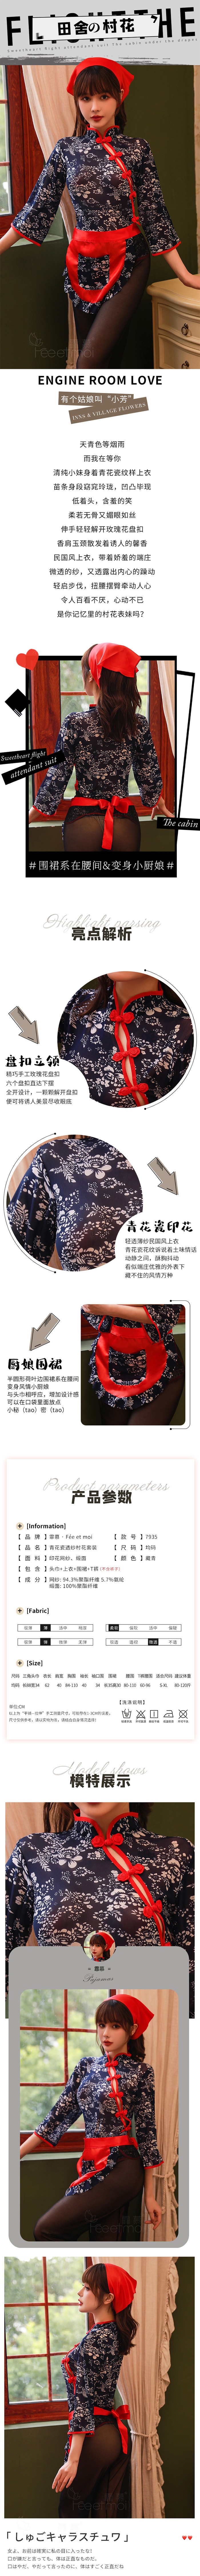 Blue and white porcelain cheongsam sheer gauze cosplay sexy suit